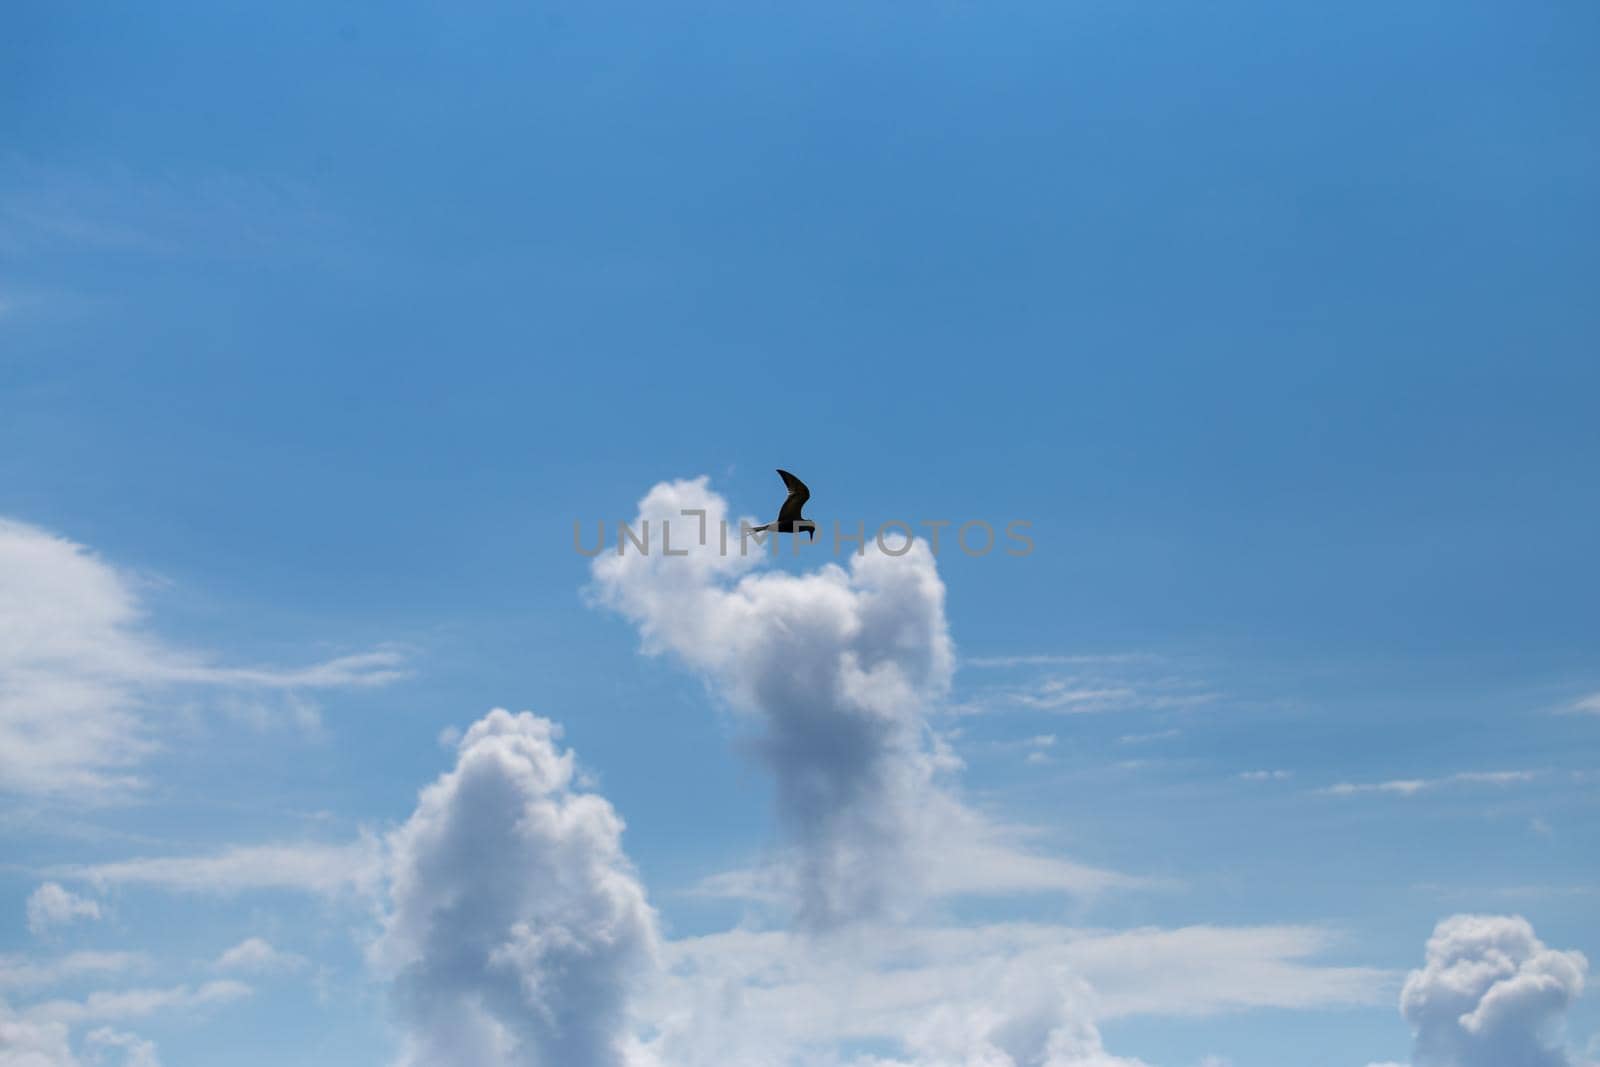 Seabird flying high in the blue sky above clouds by clusterx